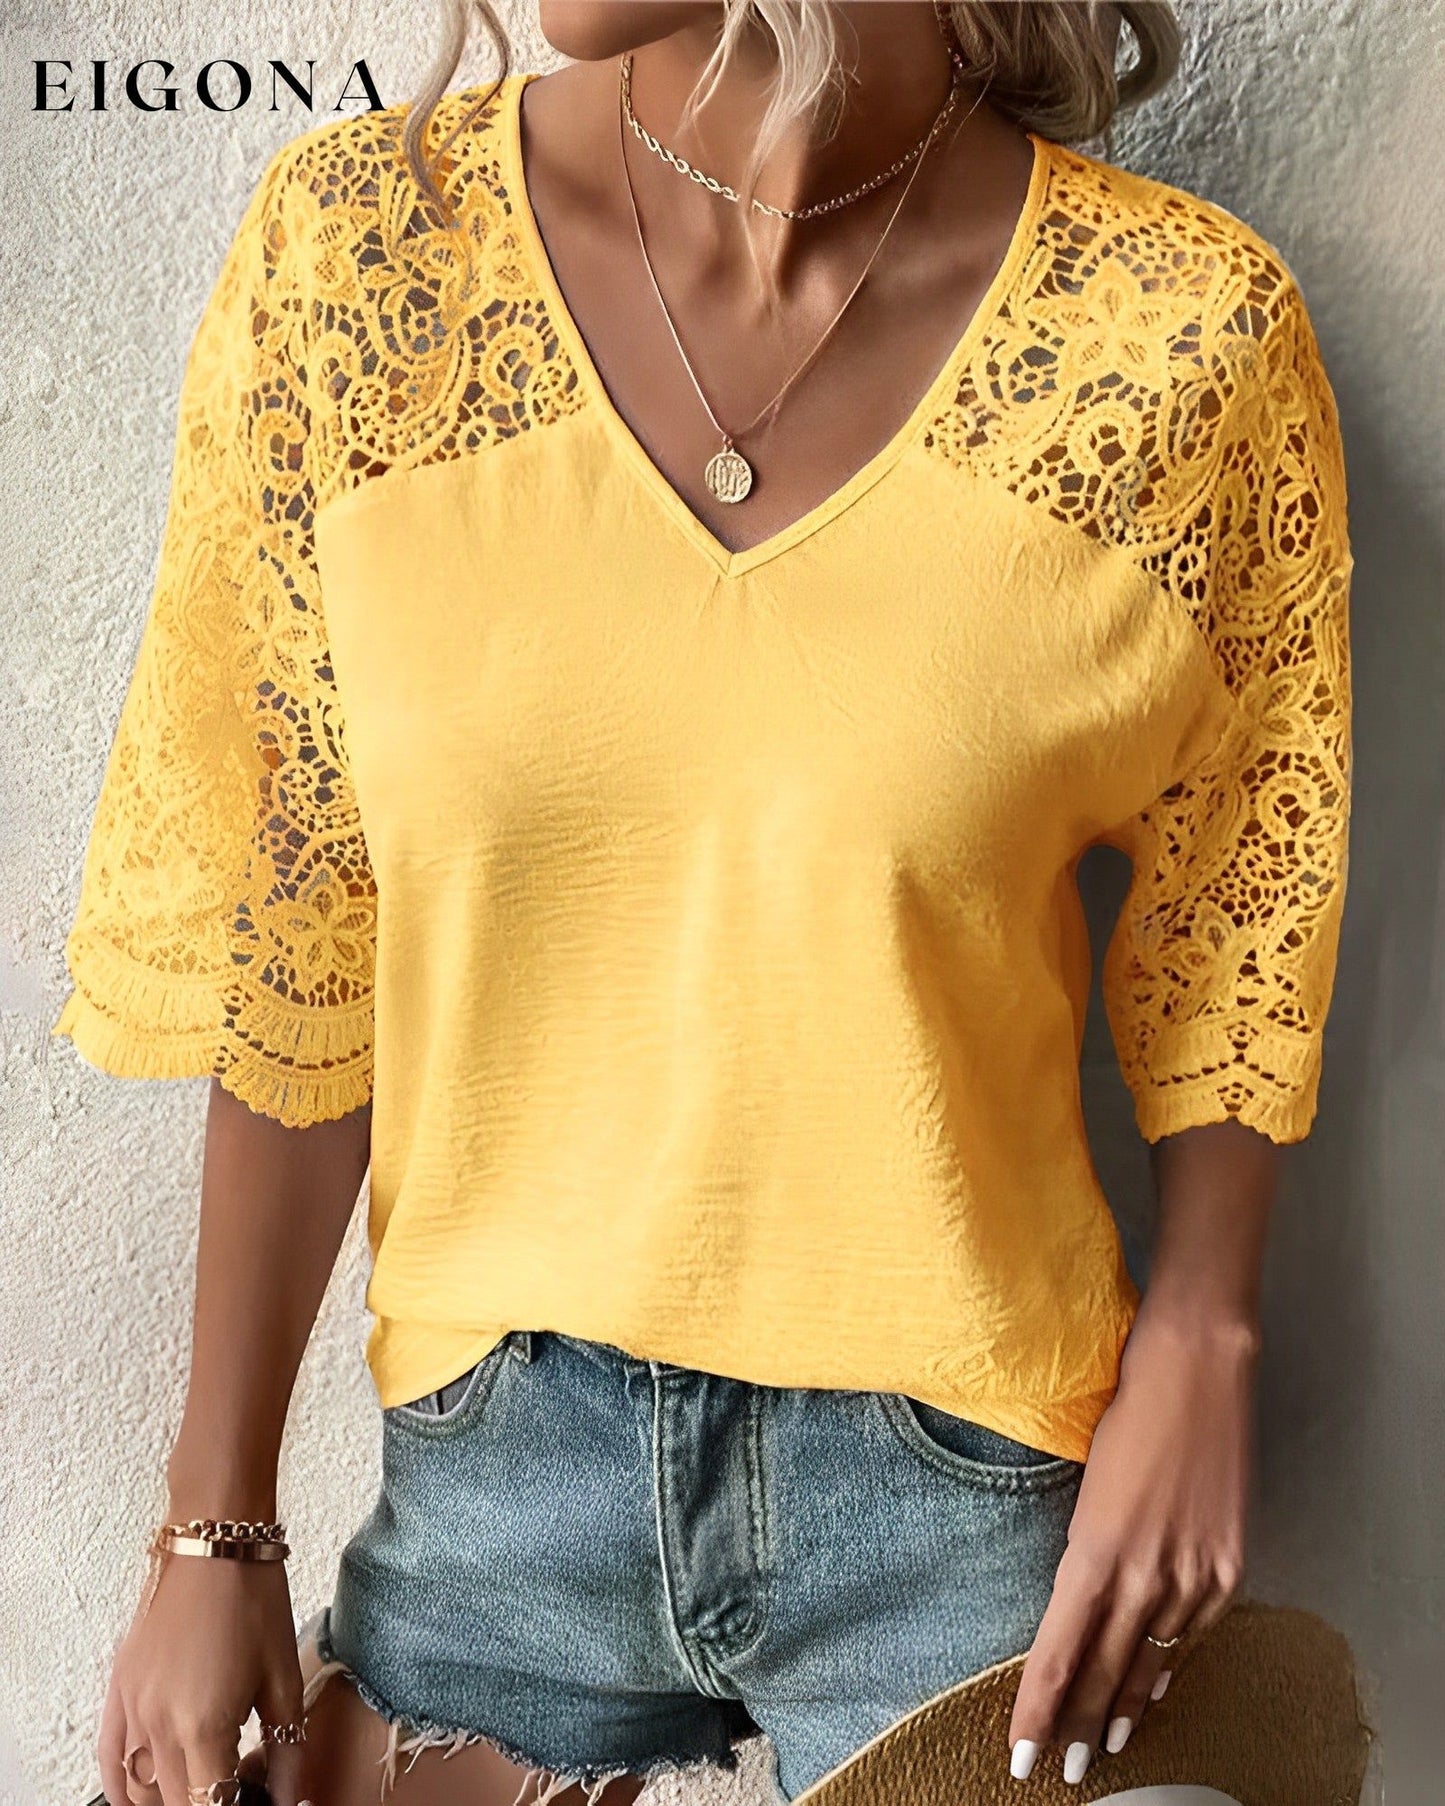 V-neck lace sleeve Blouse Yellow 23BF clothes Short Sleeve Tops Spring Summer T-shirts Tops/Blouses